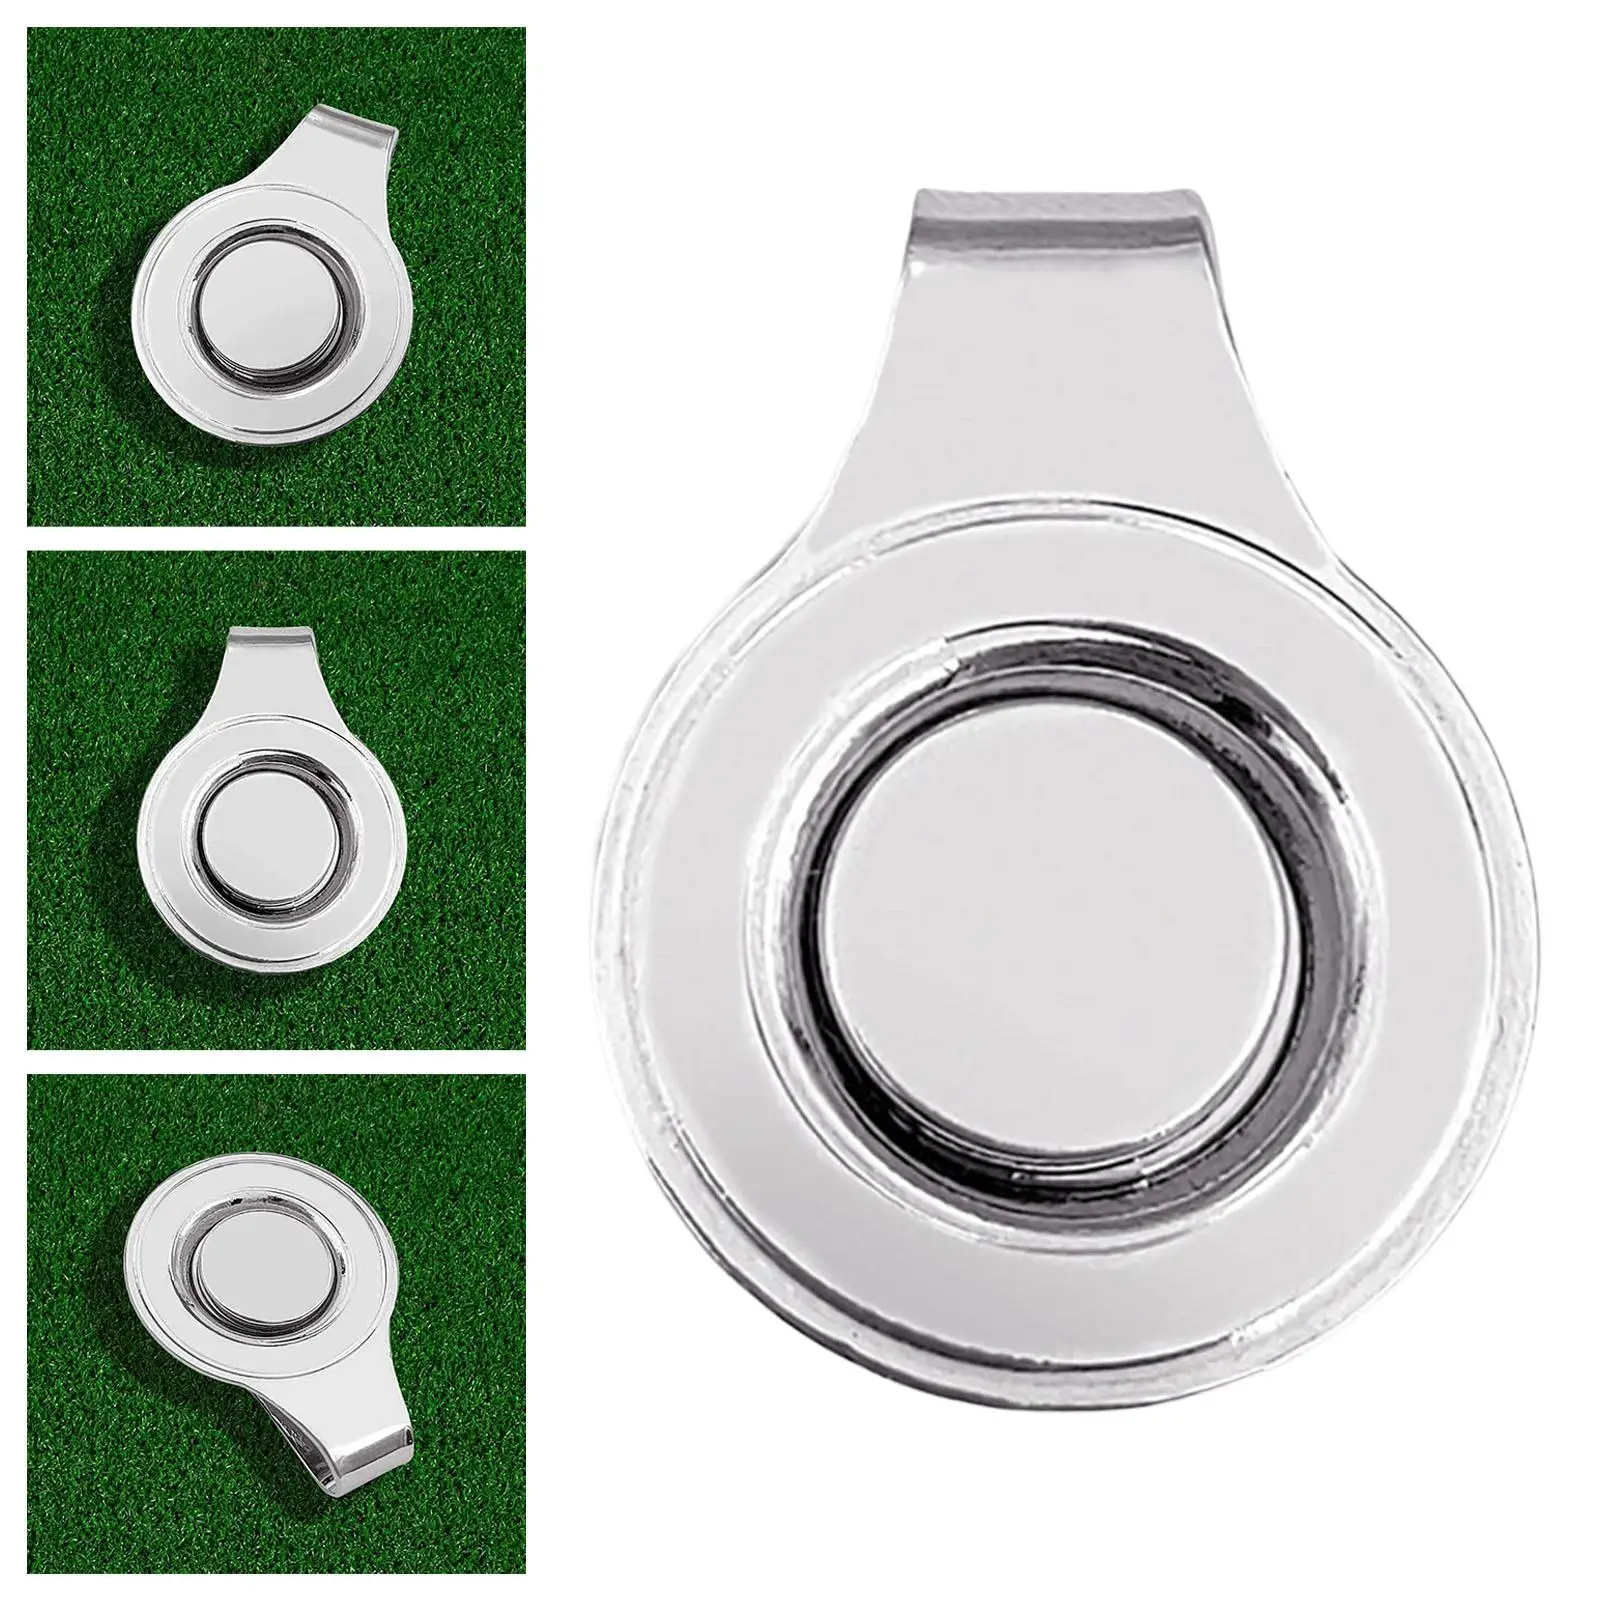 Magnetic Golf Caps Clip Clamp Ball Marker Holder Easily Take and Use golf Accessory Built in Magnet Convenient Universal